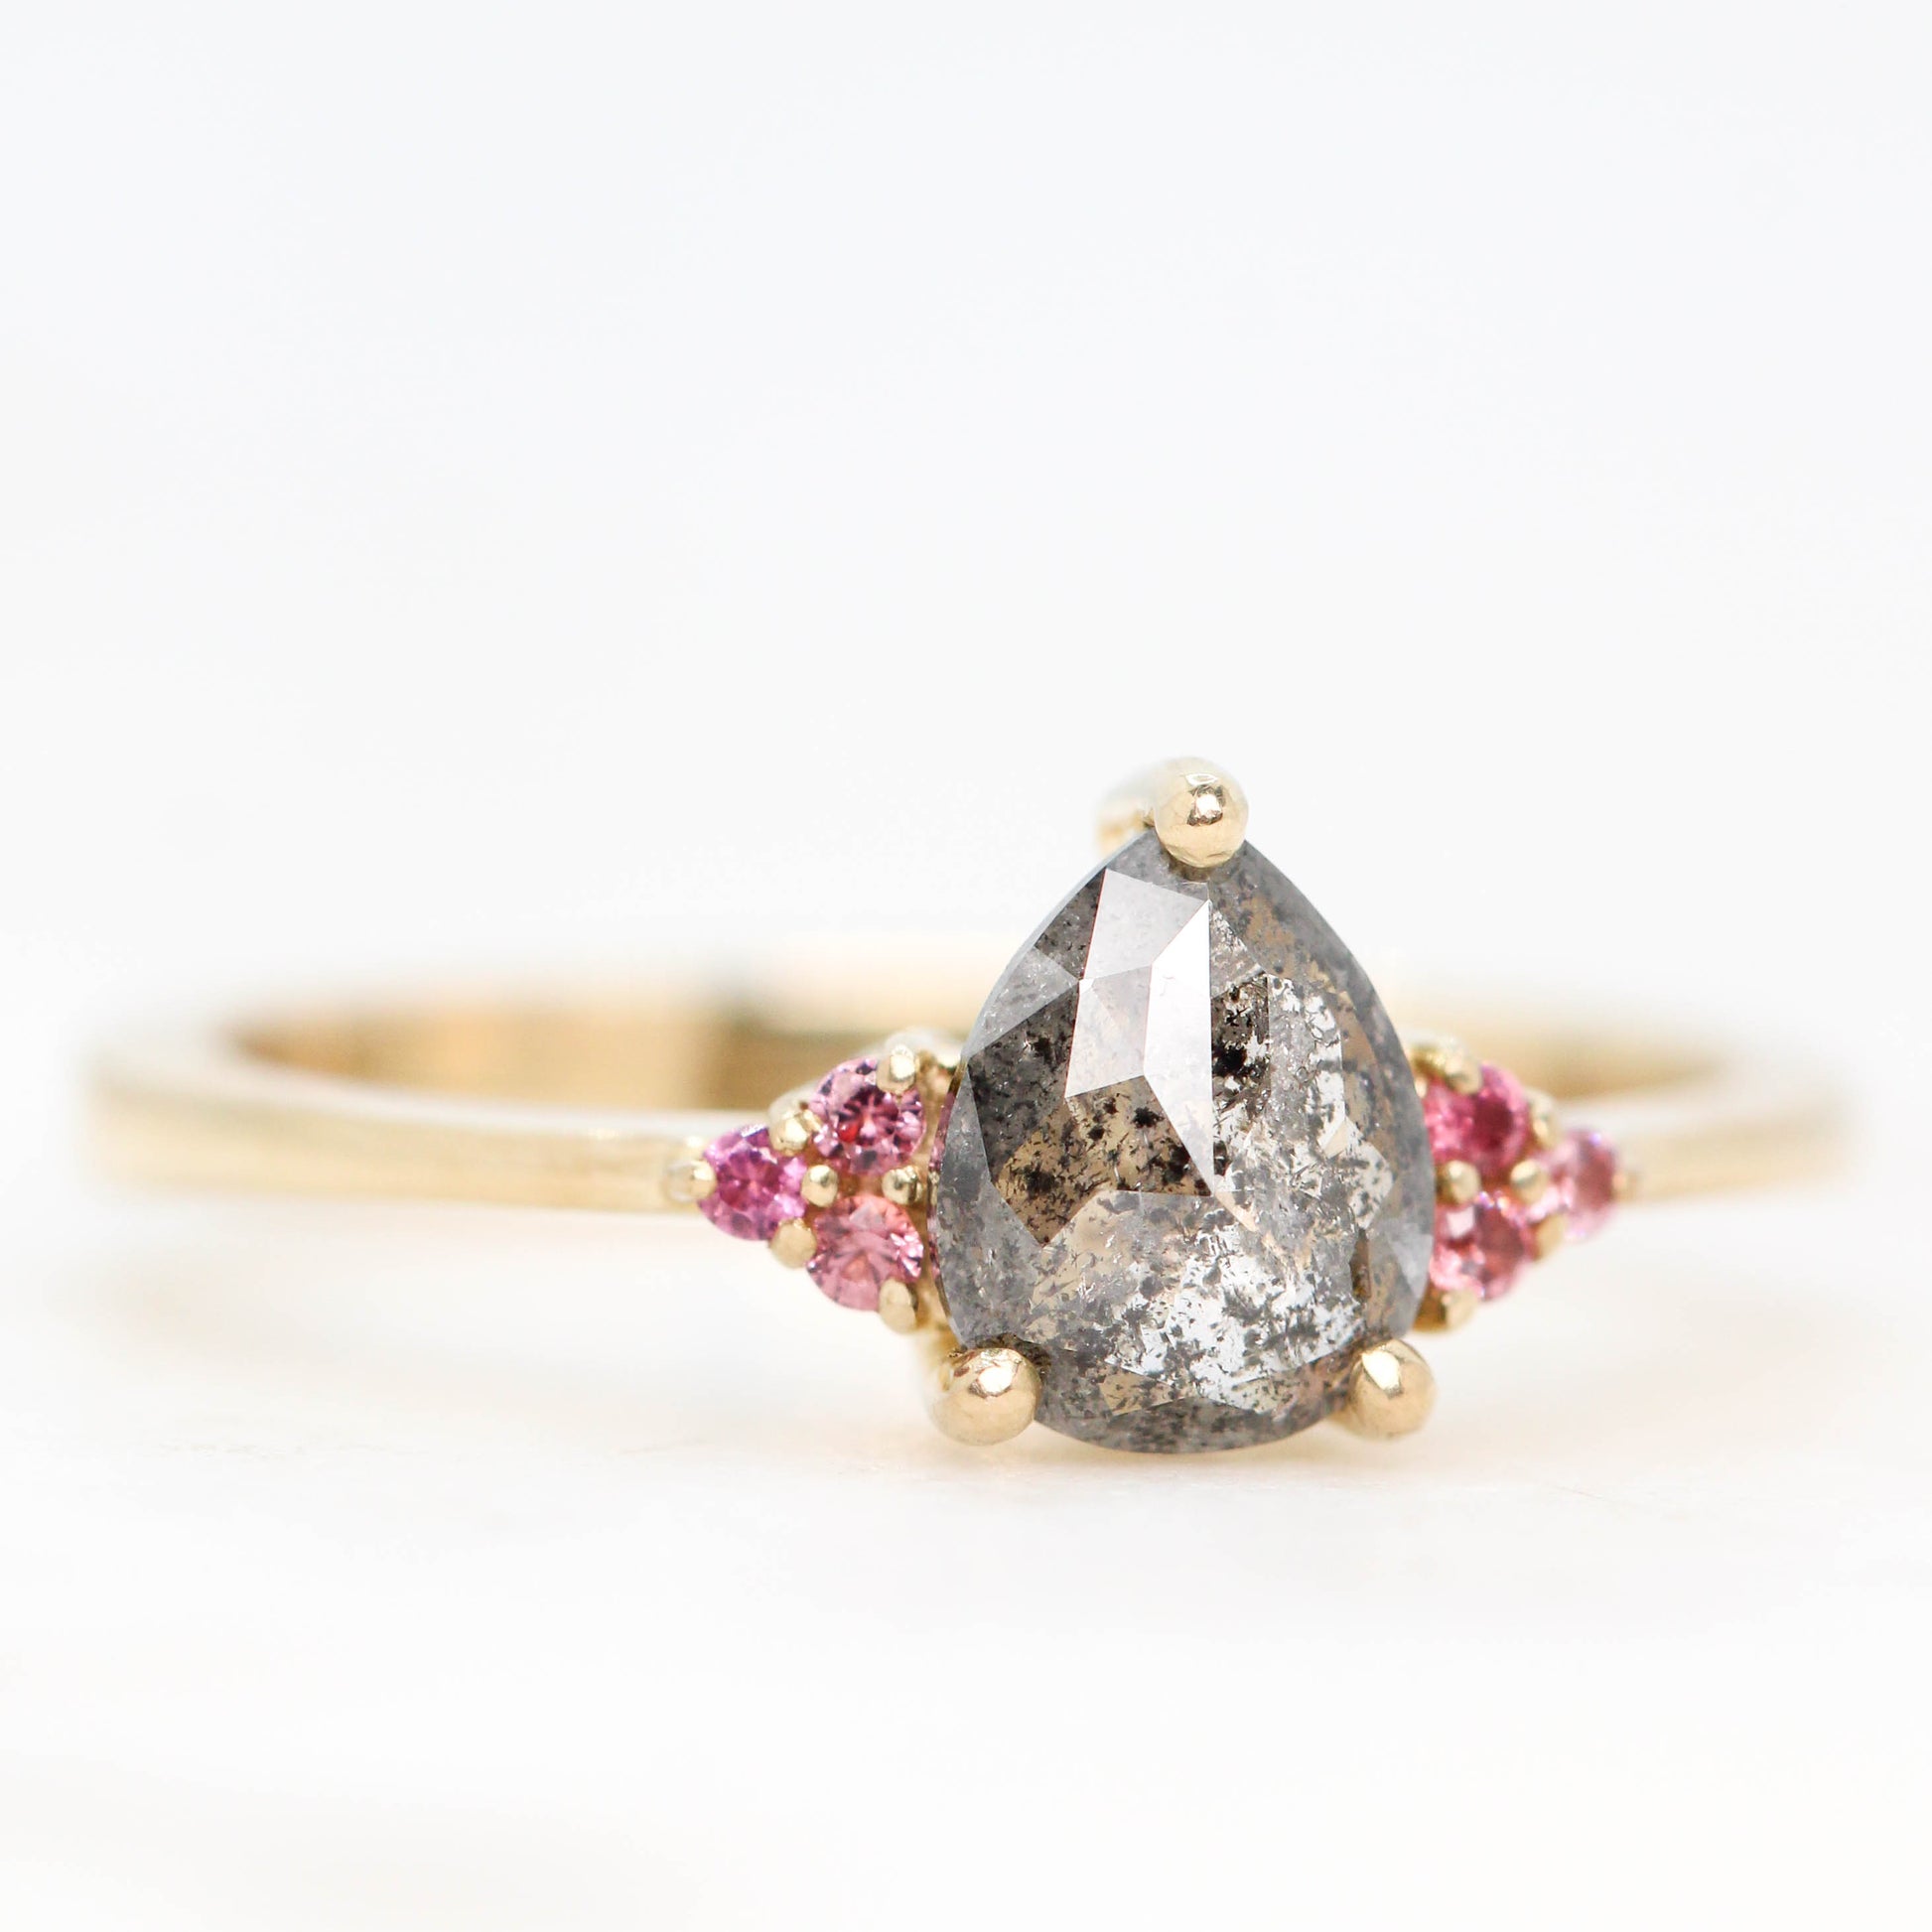 Imogene Ring with a 0.72 Carat Dark and Clear Celestial Pear Diamond and Berry Sapphire Accents in 14k Yellow Gold - Ready to Size and Ship - Midwinter Co. Alternative Bridal Rings and Modern Fine Jewelry